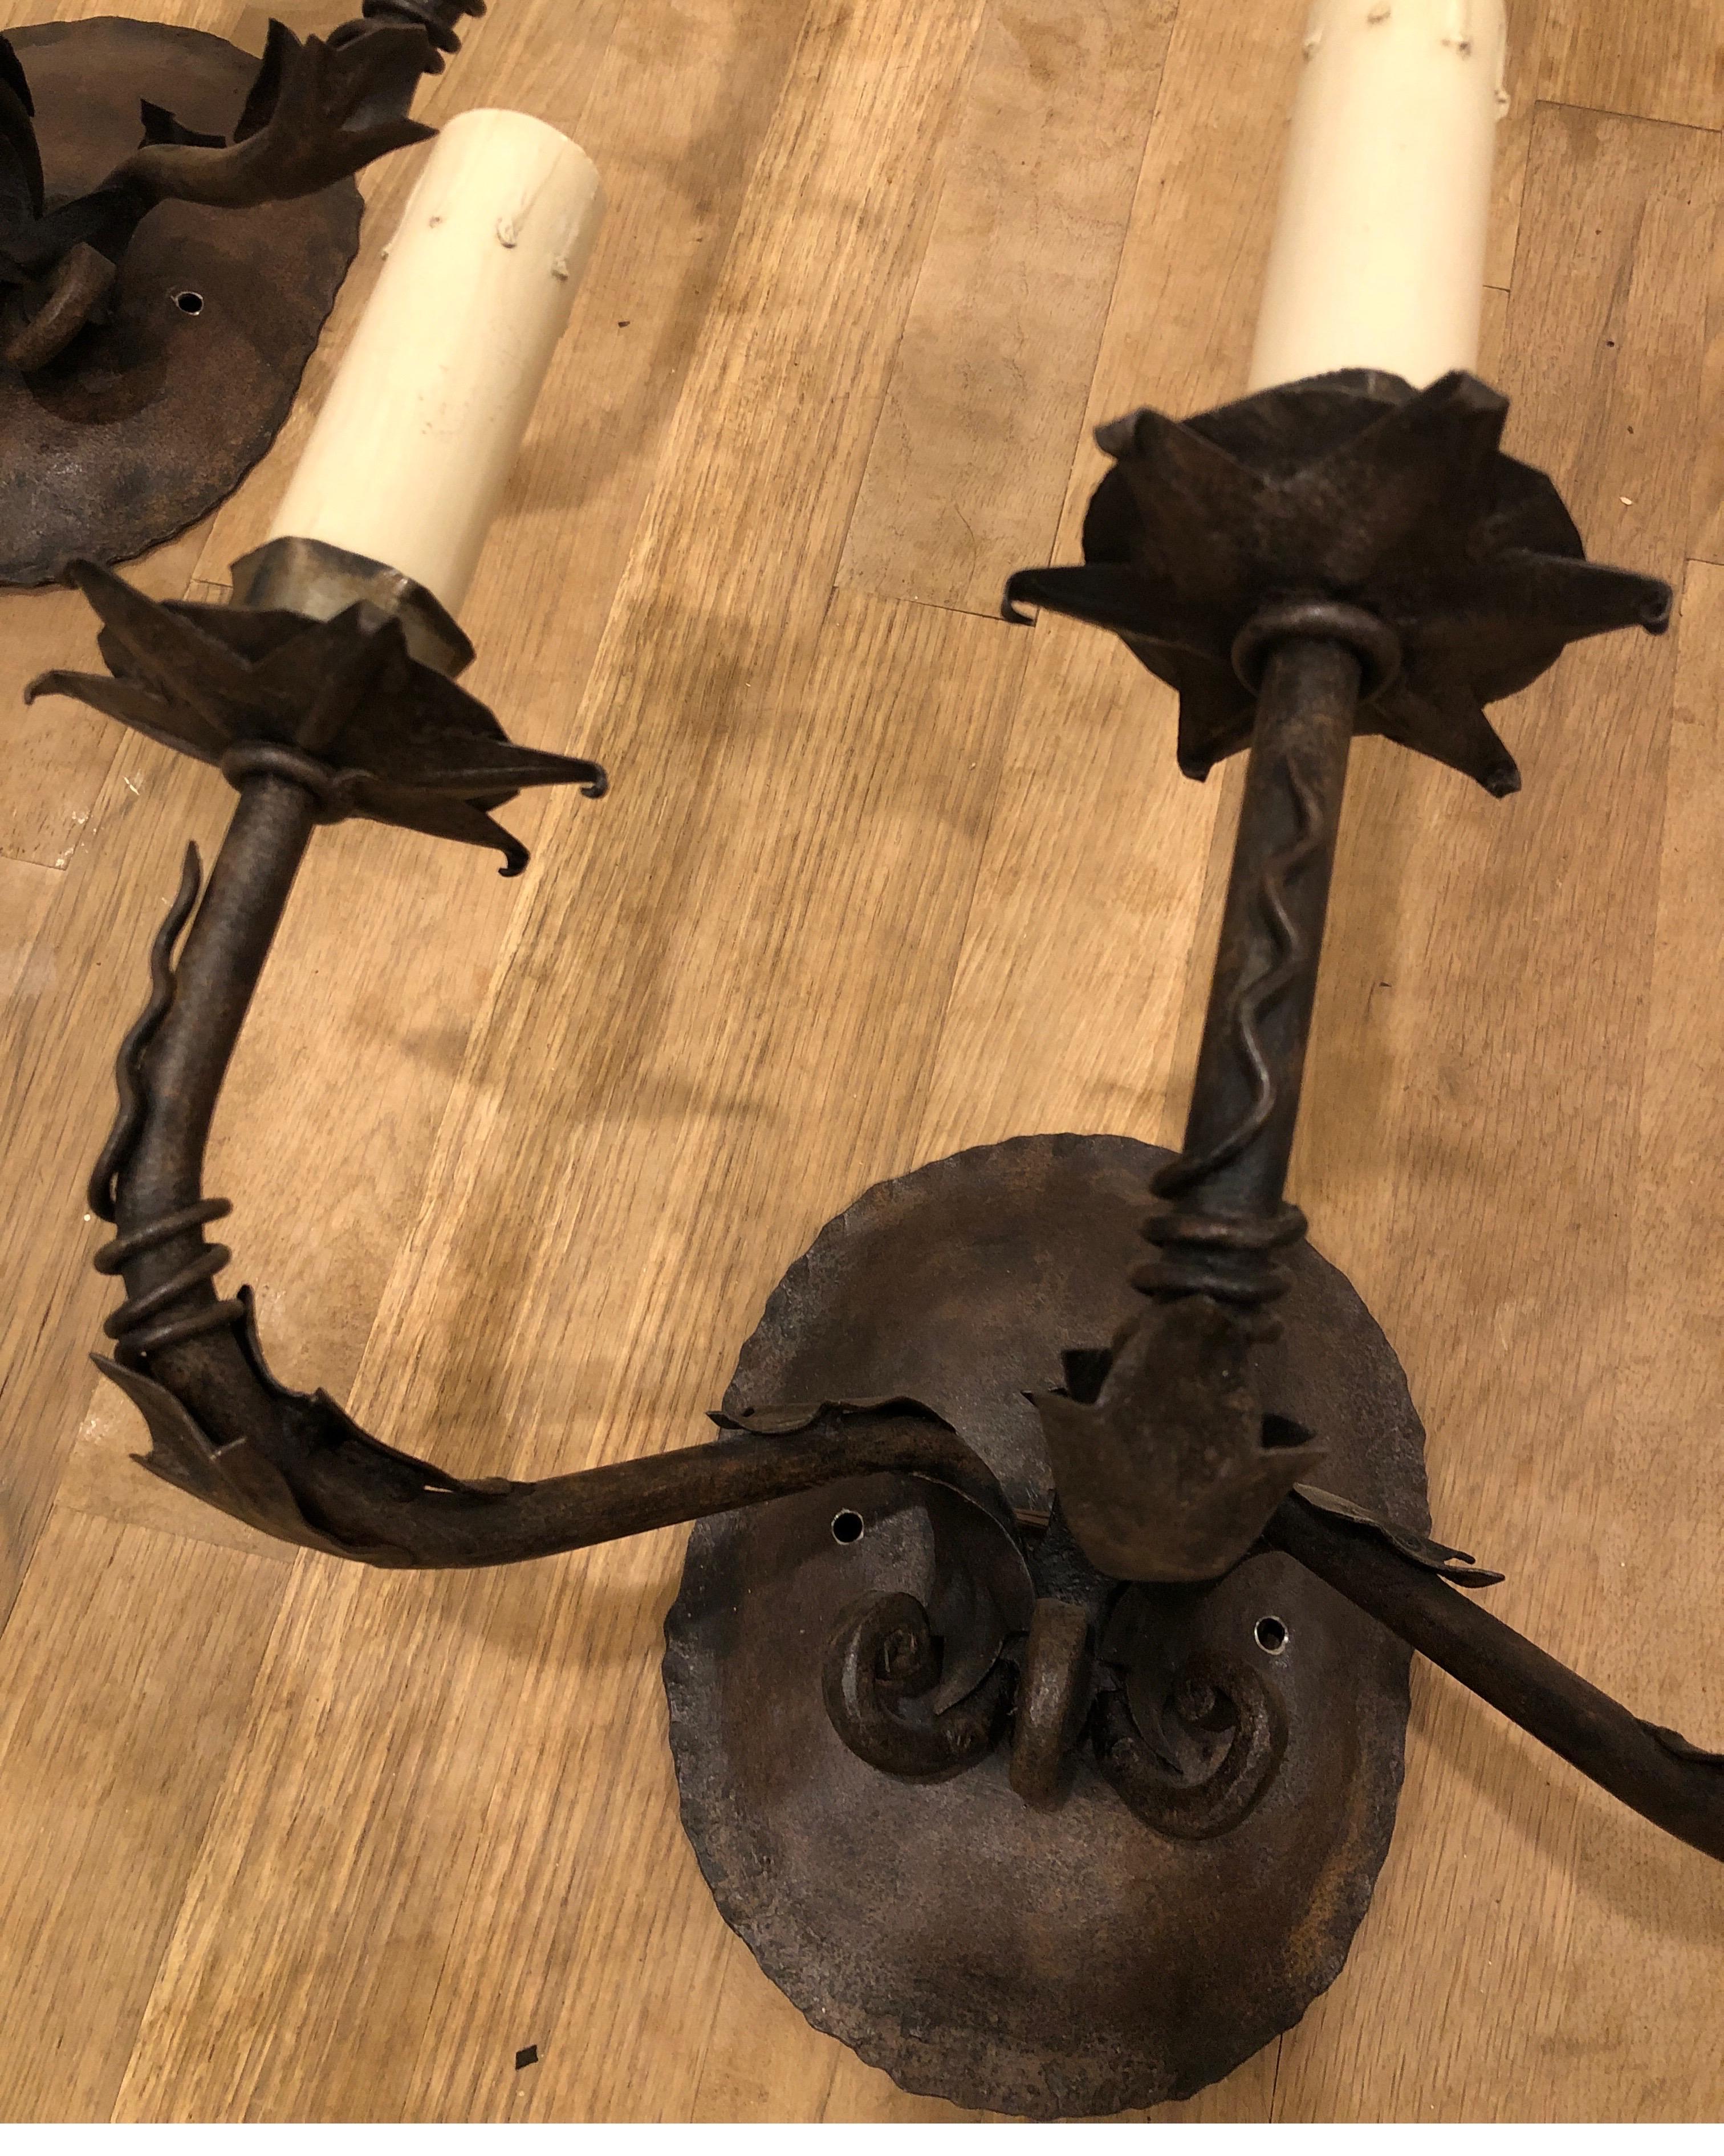 Pair of Paul Ferrante iron wall sconces. Triple arms with 6 point star under each candle stick. 
Three faux candle melt covers.

See images for details.